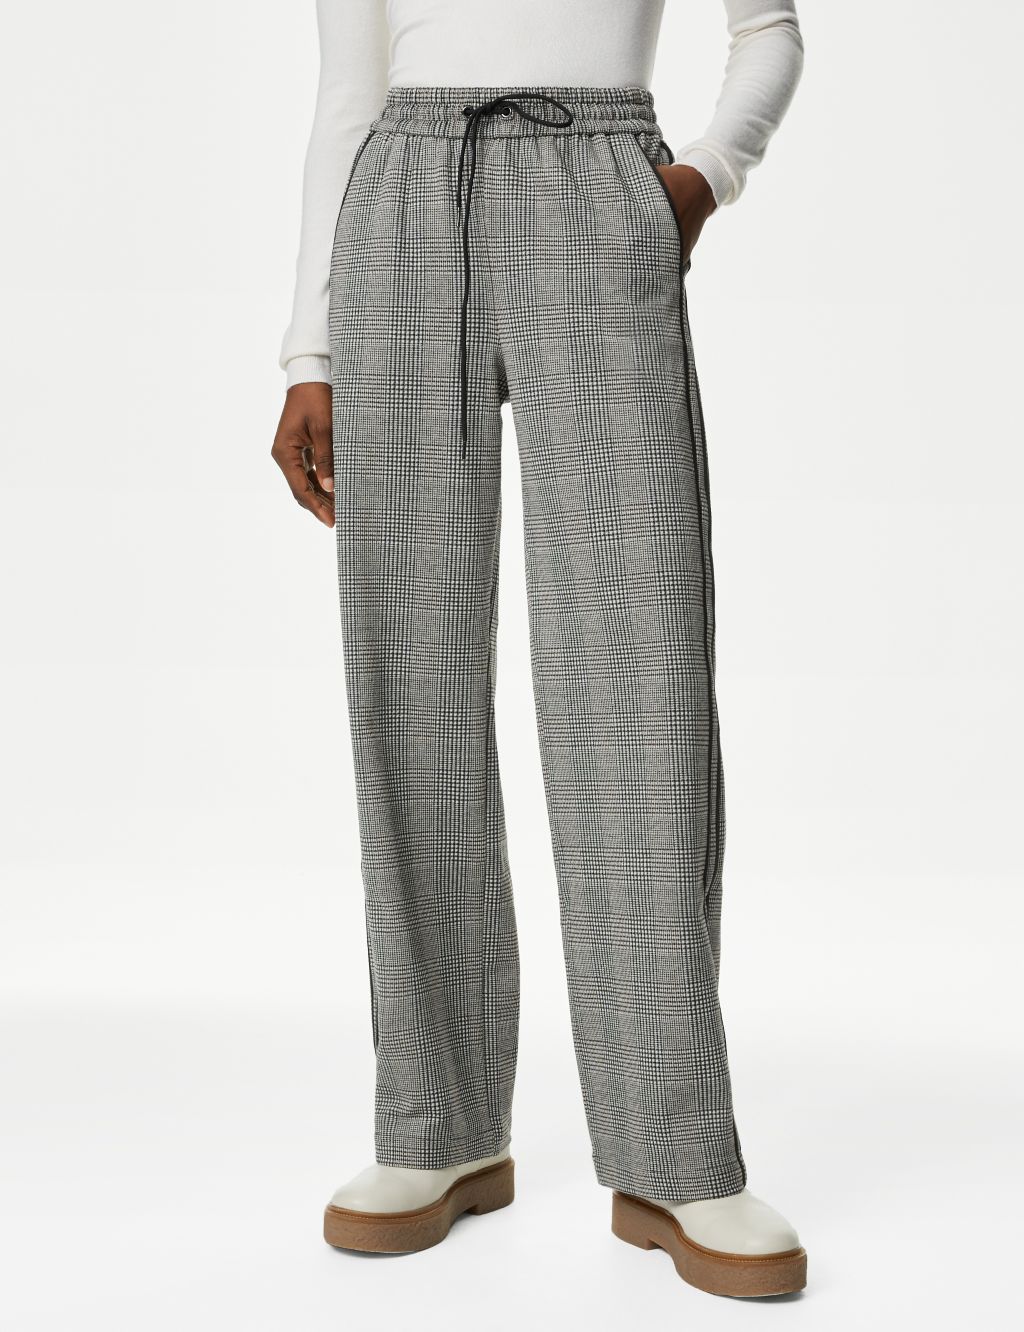 Checked Straight Leg Trousers image 4